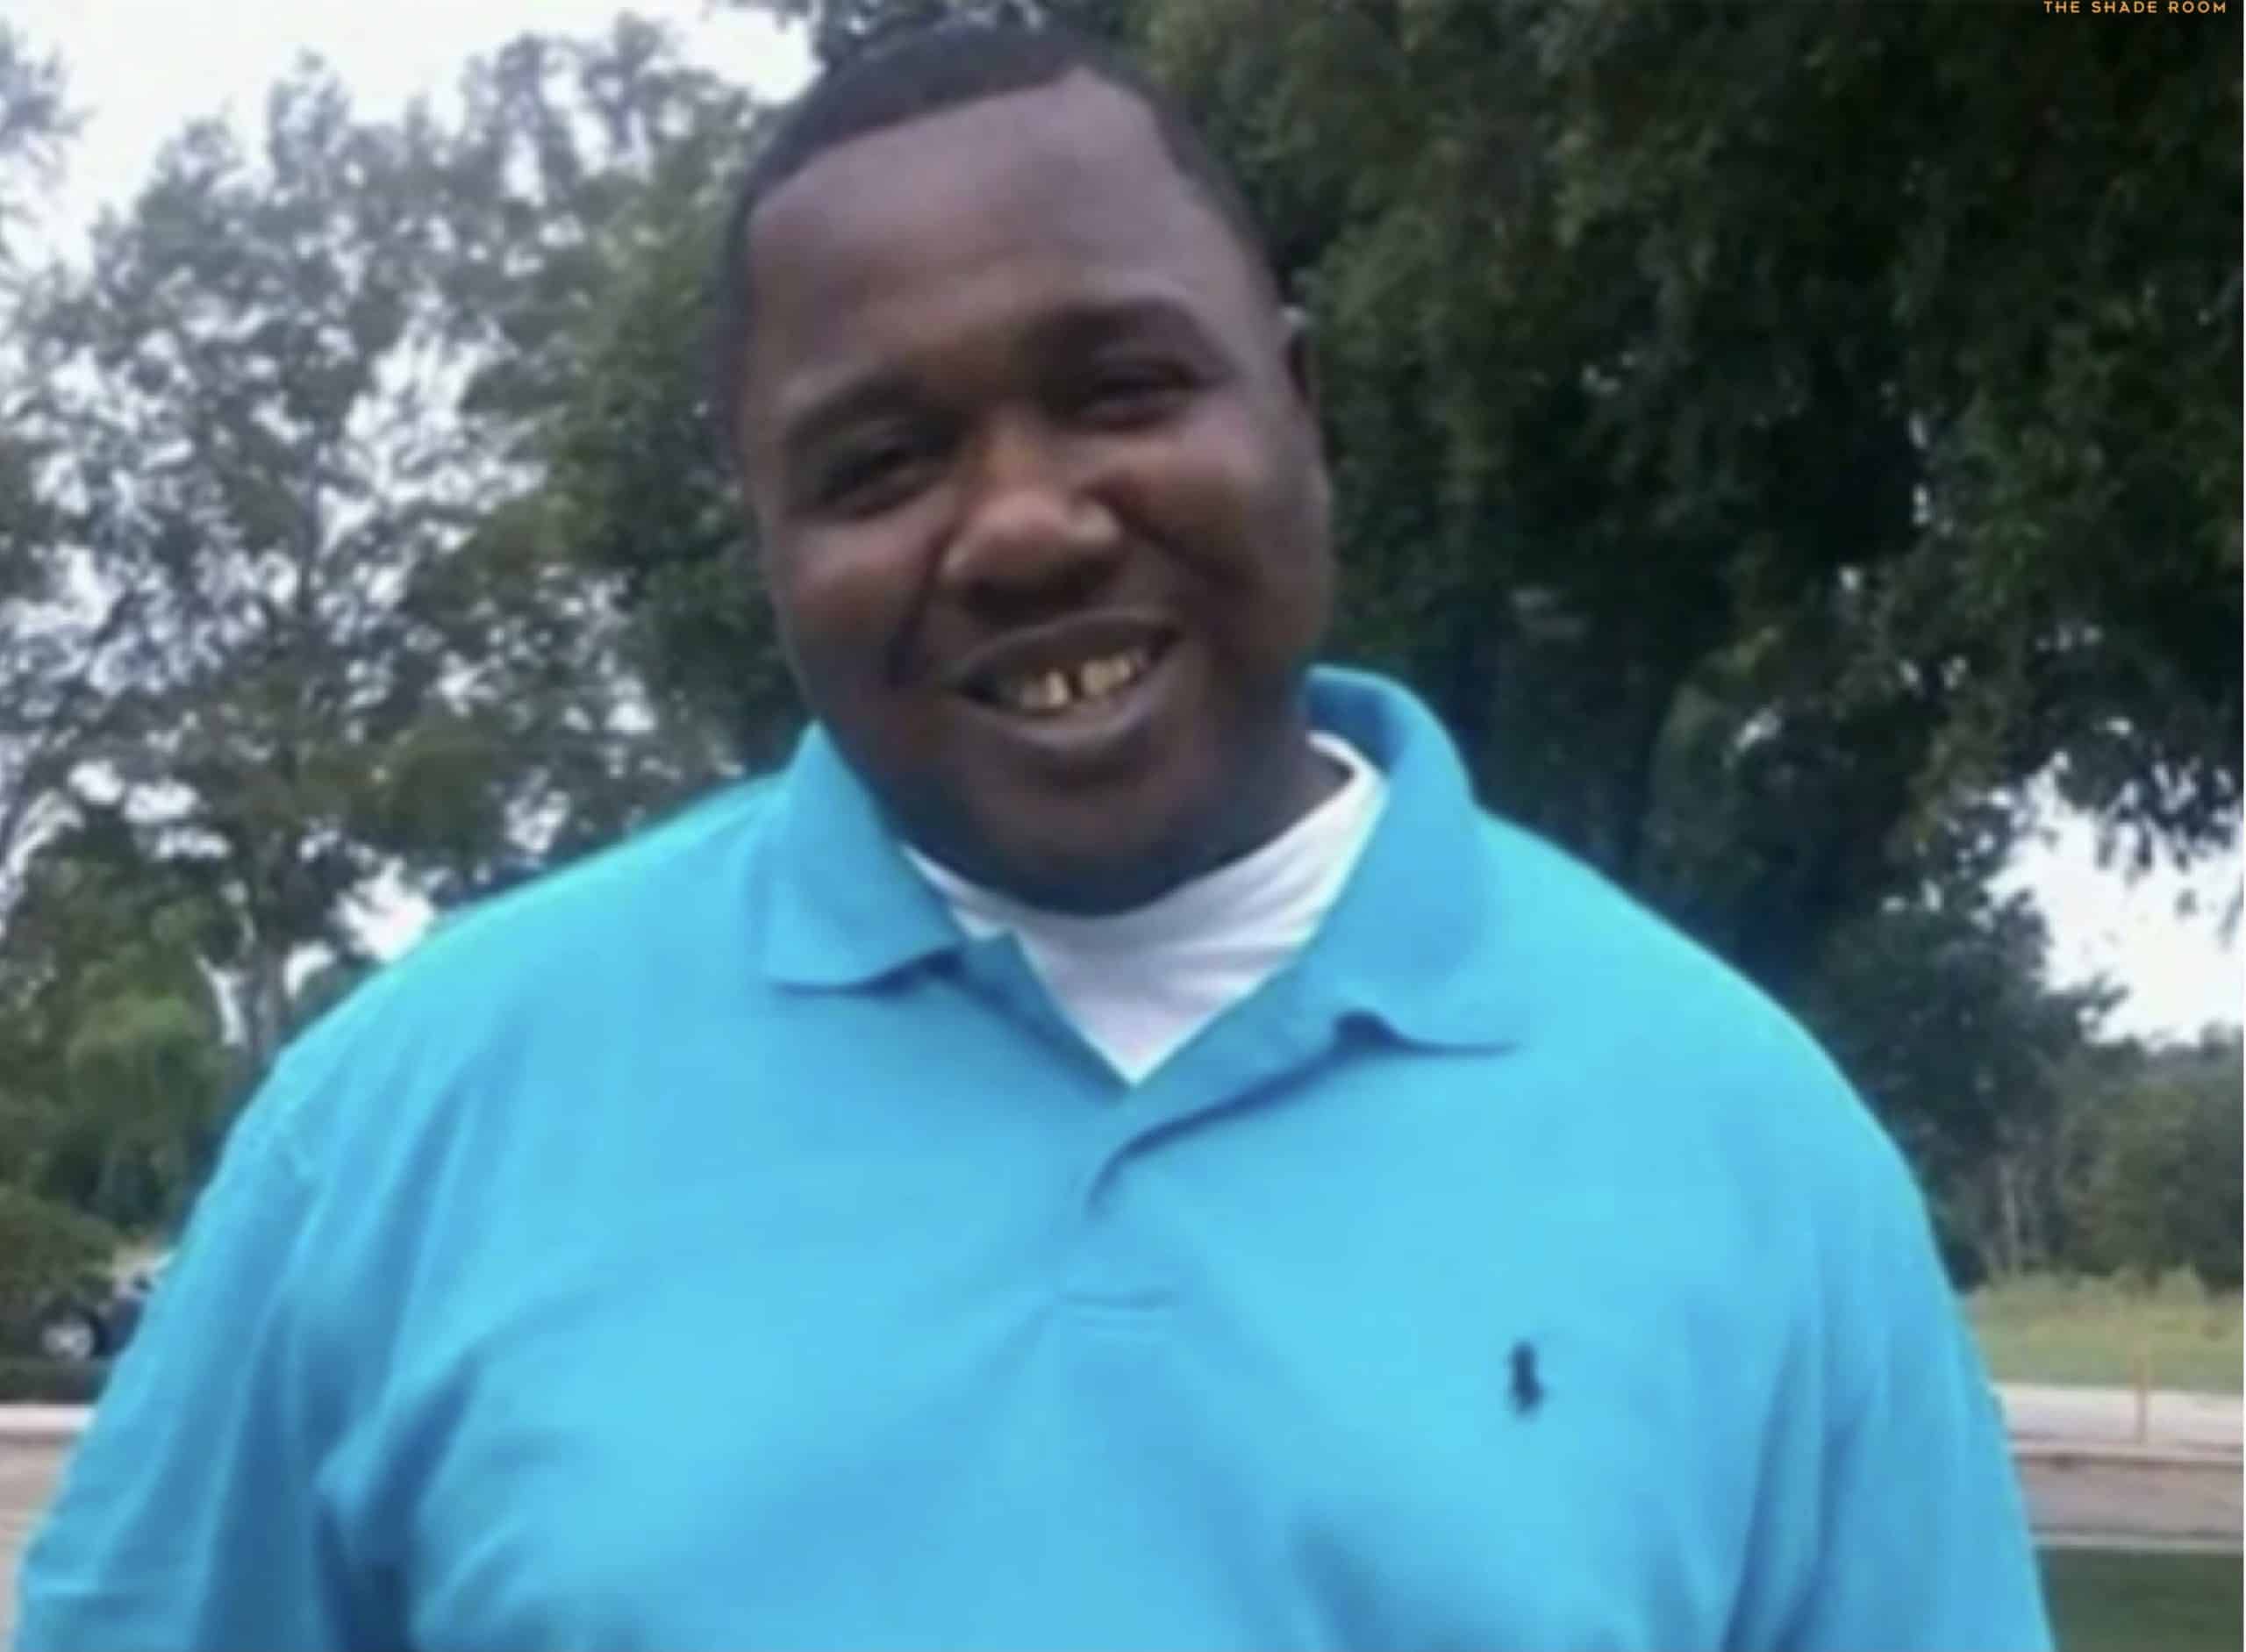 Baton Rouge City Council Votes To Pass $4.5M Settlement For Alton Sterling's Family (Update)